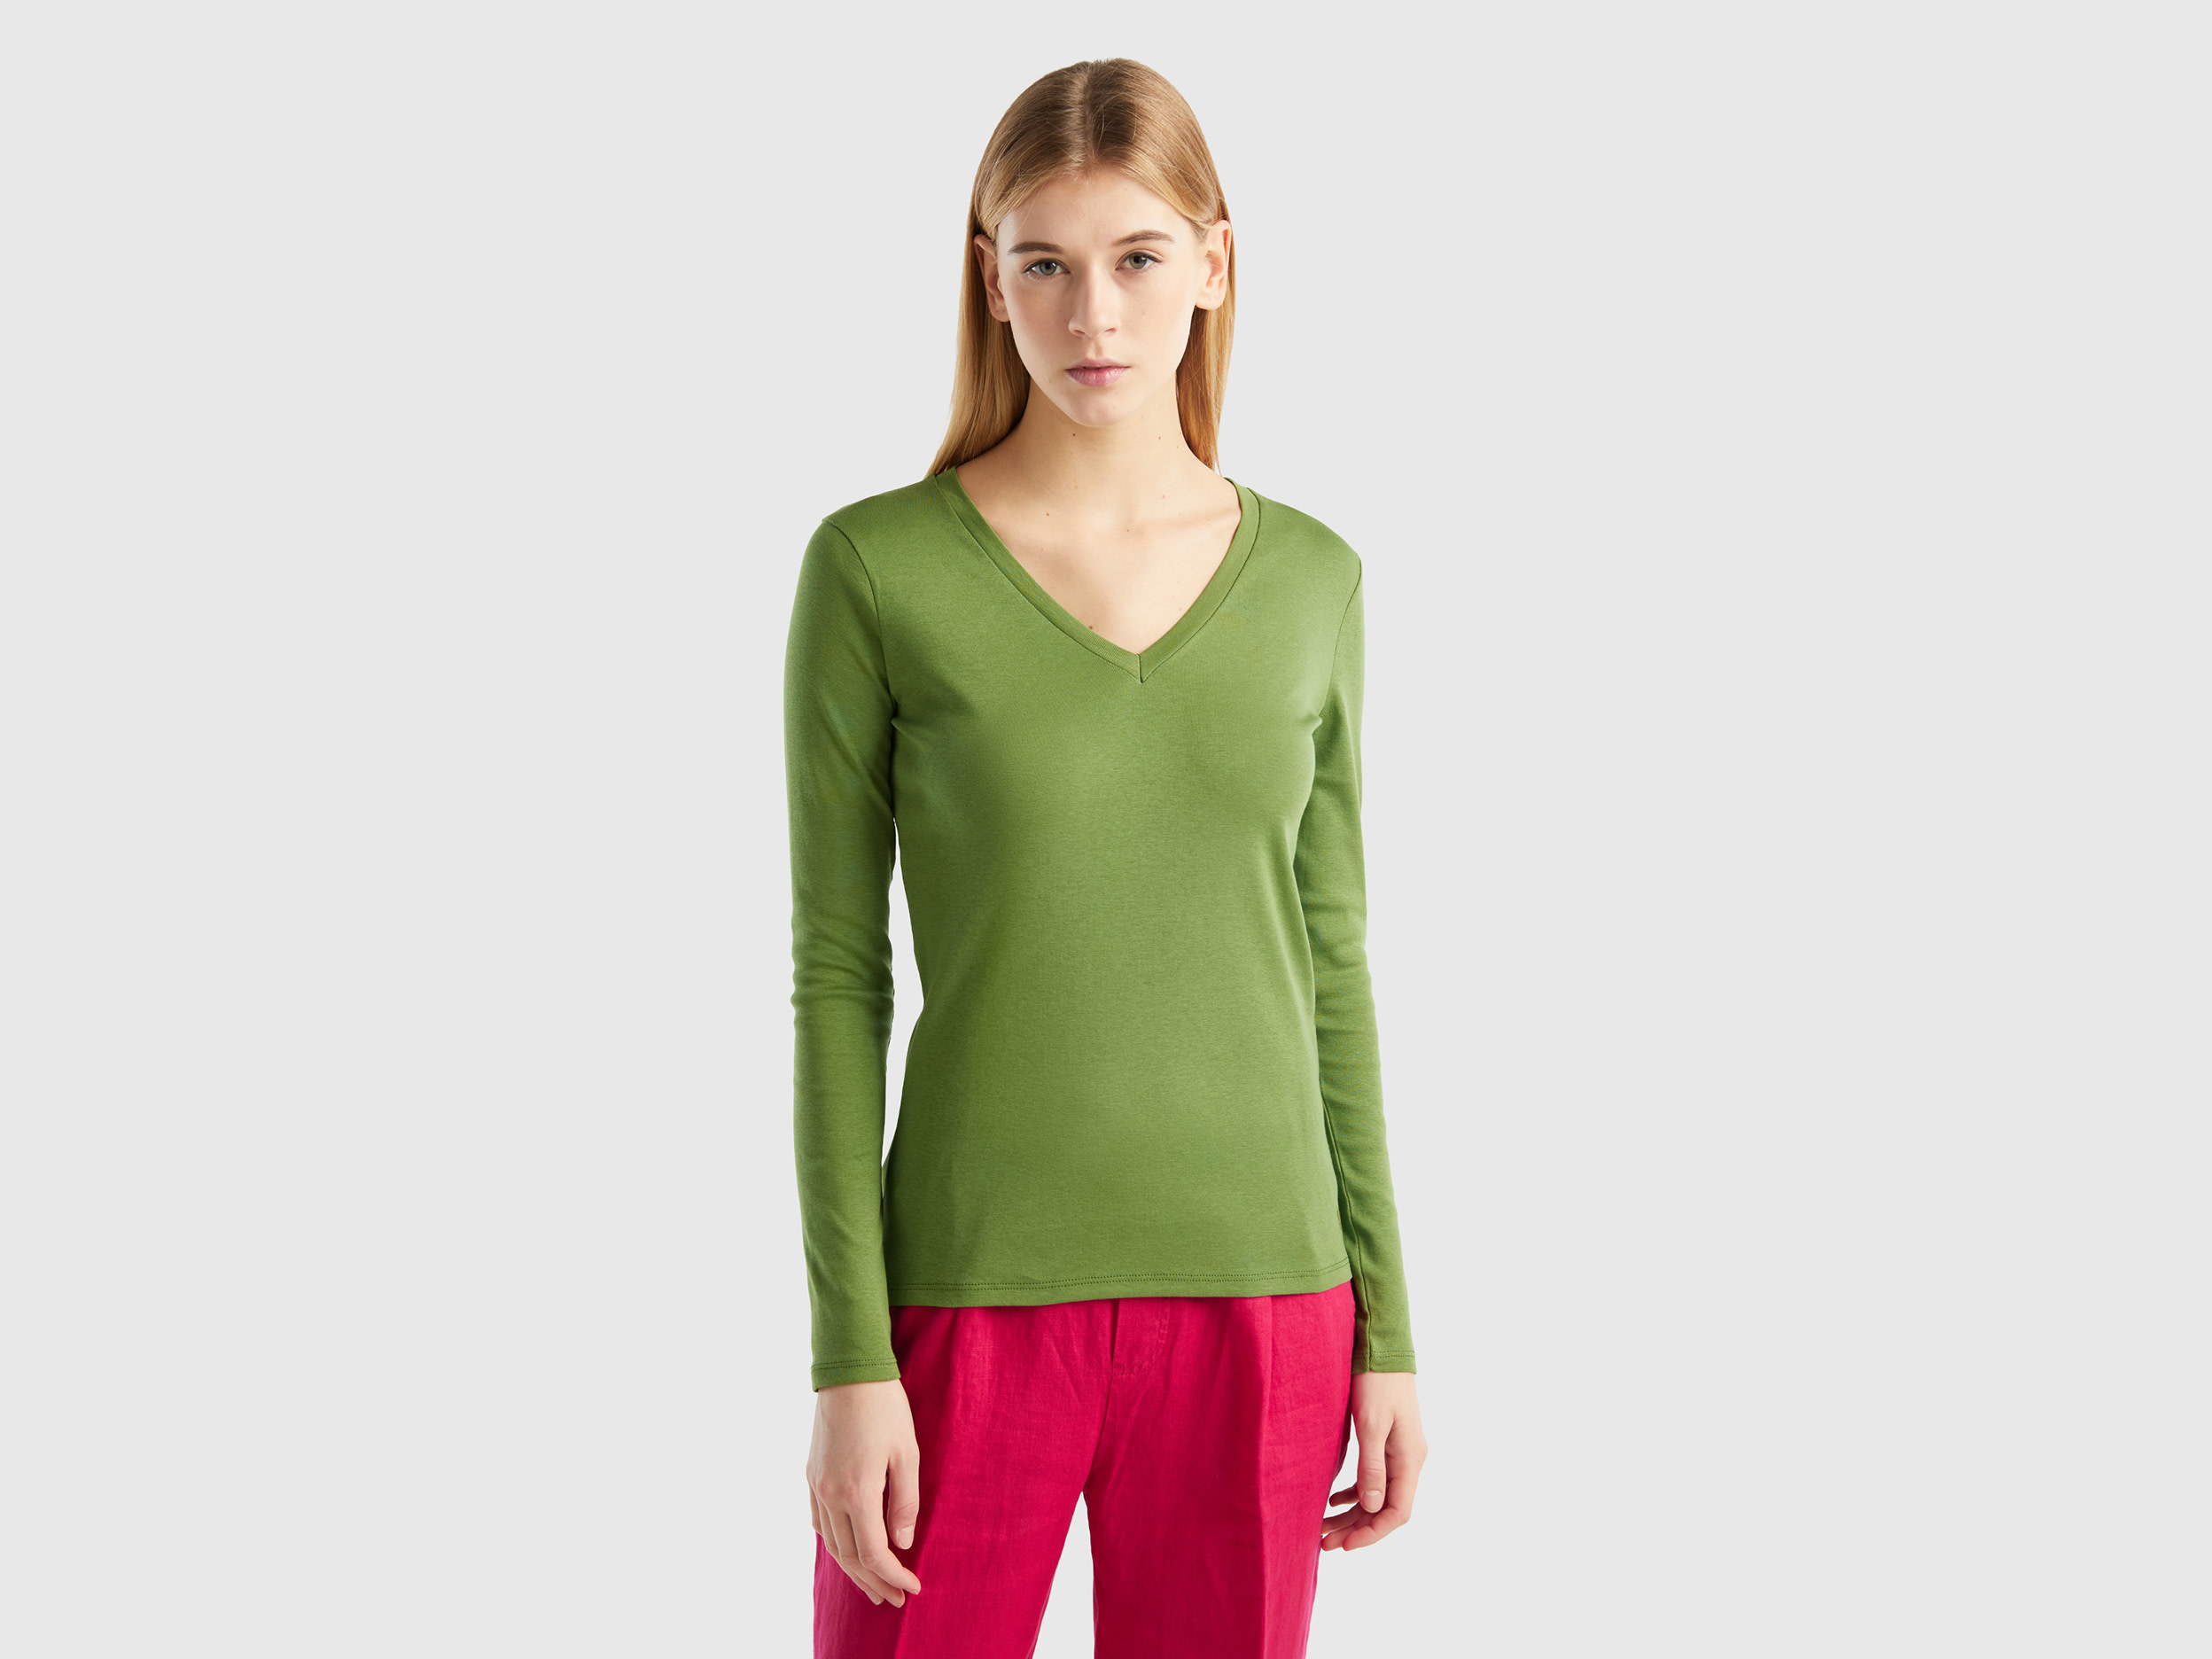 Benetton, Long Sleeve T-shirt With V-neck, size S, Military Green, Women